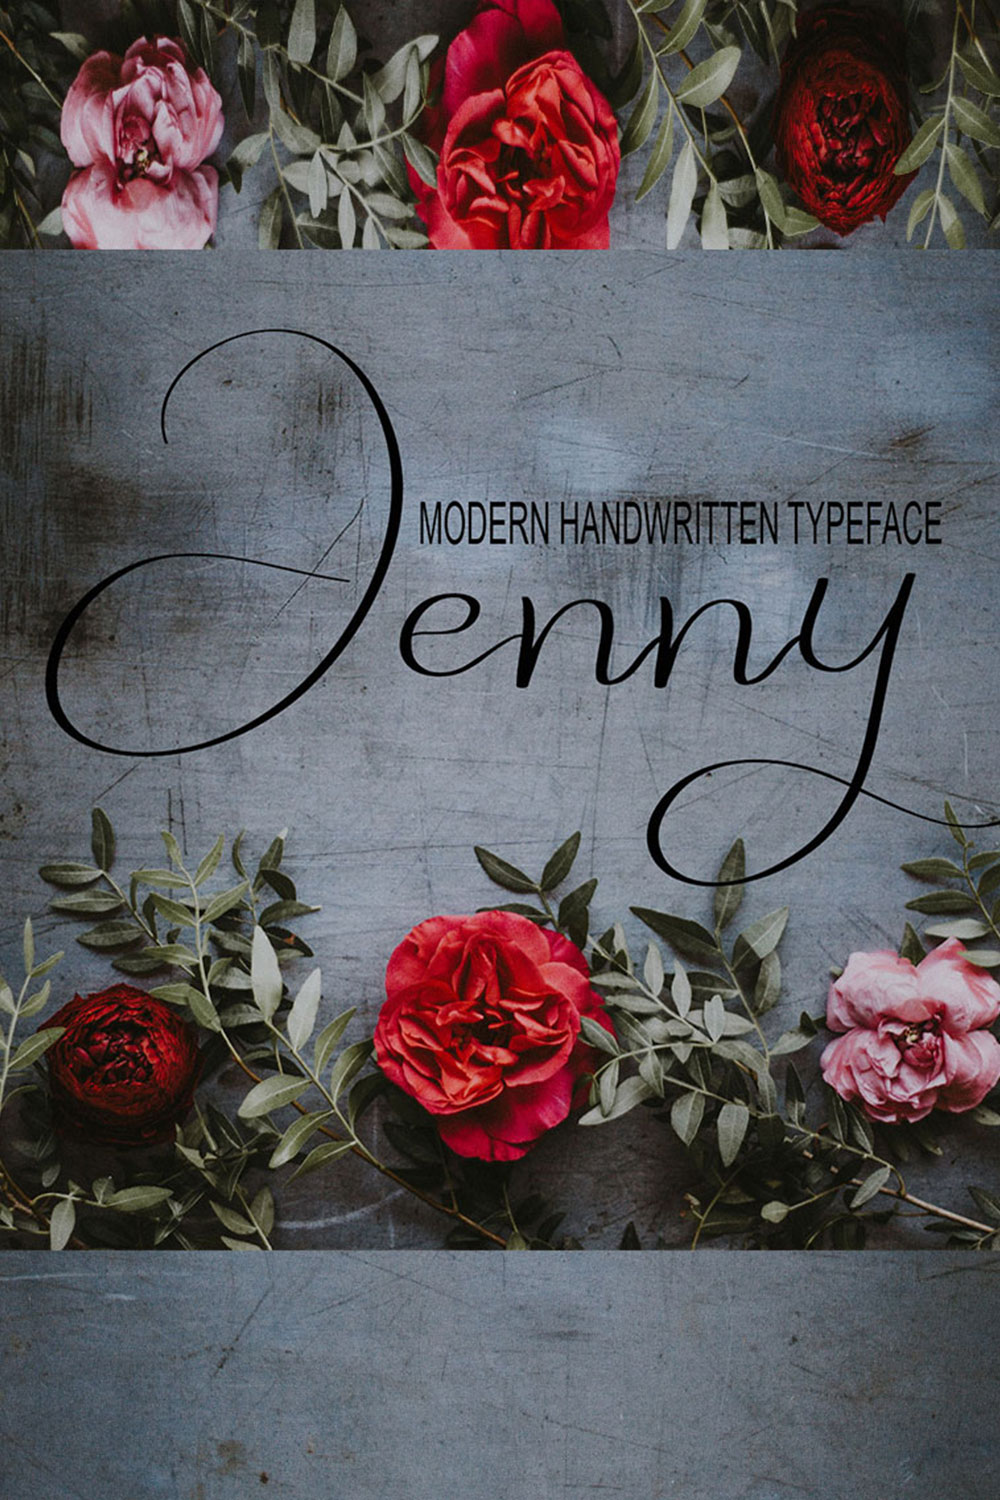 An image with text showing off the fabulous Jenny font.